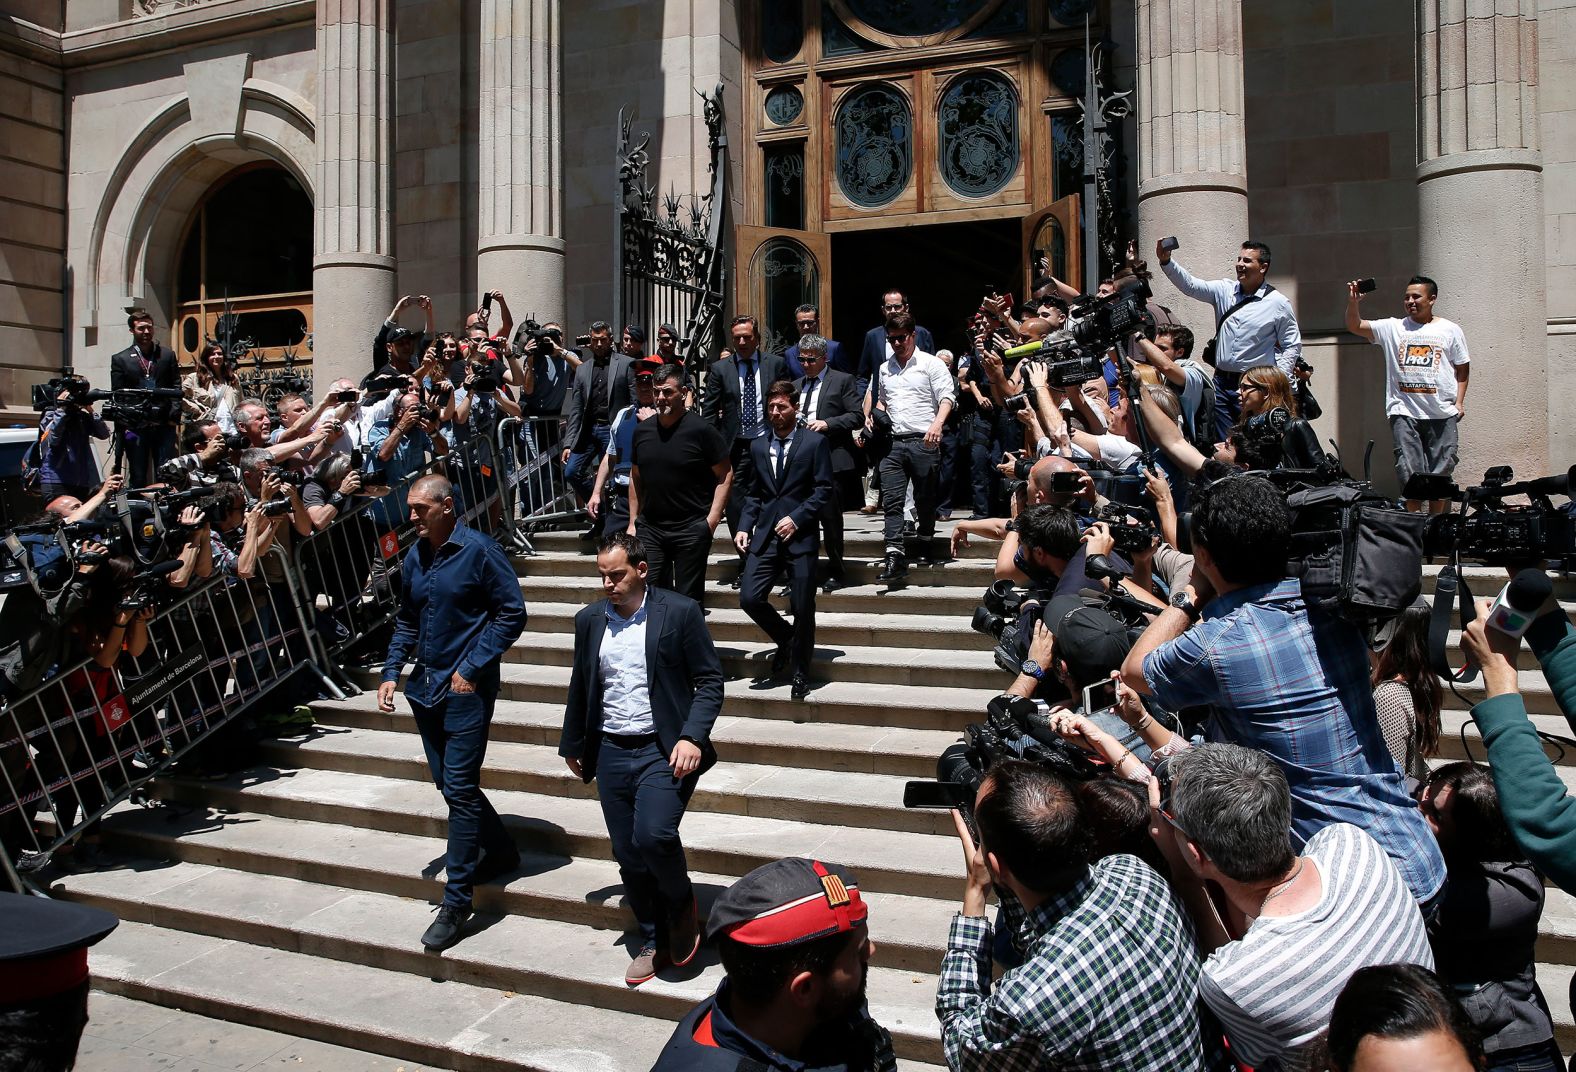 Messi leaves a courthouse in Barcelona in June 2016. A Barcelona court fined Messi €2 million ($2.3 million) and <a href="https://www.cnn.com/2016/07/06/football/lionel-messi-tax-guilty-sentence-21-months/index.html" target="_blank">sentenced him to 21 months in prison for tax fraud.</a> But because it was his first offense and his sentence was less than two years, he wouldn't serve any jail time. In July 2017, the Spanish courts reduced Messi's prison sentence to an additional fine of €252,000 ($287,000).